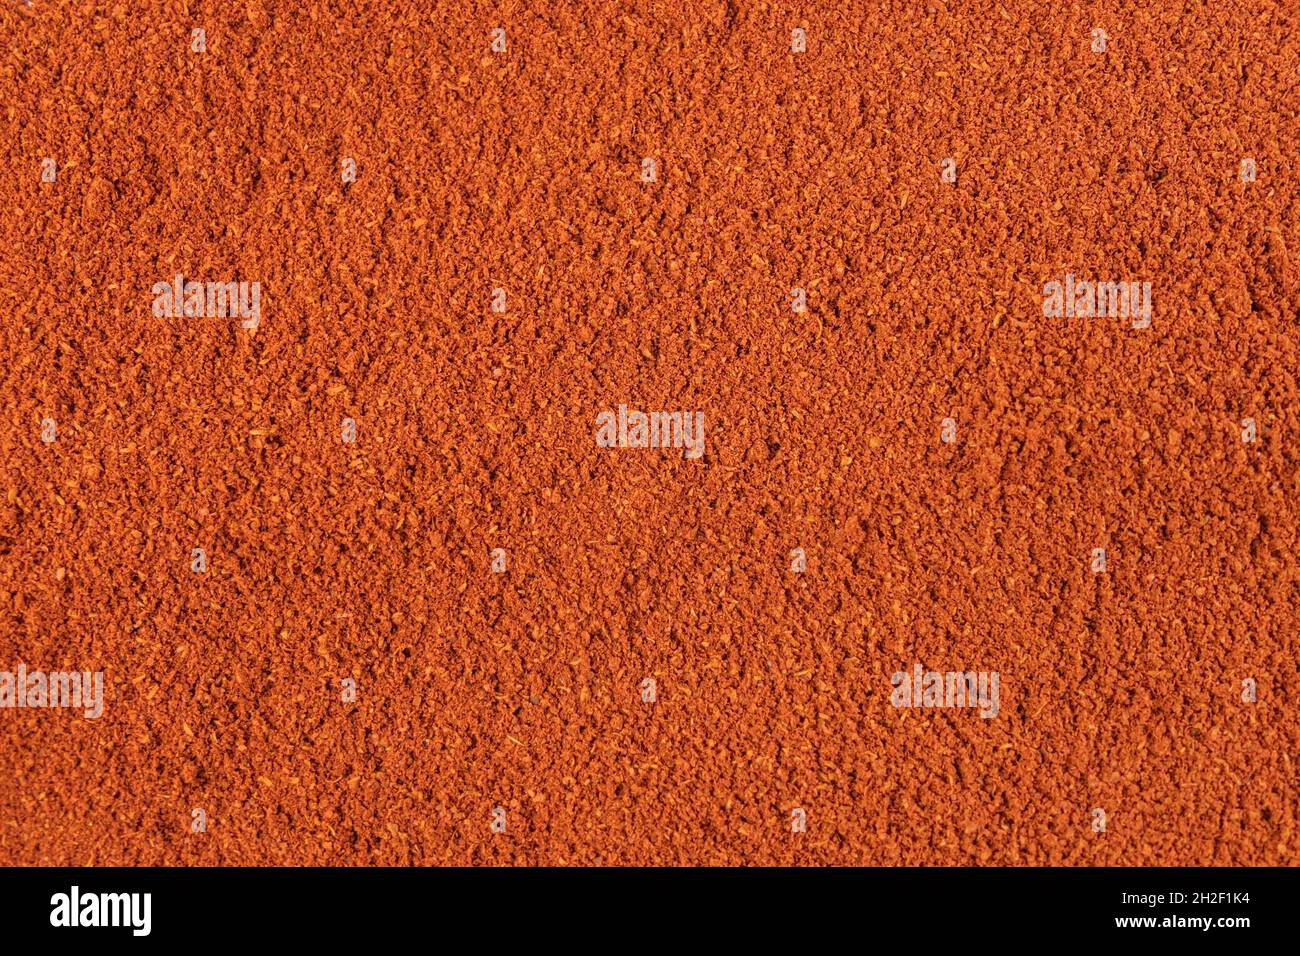 Tandoori Masala mix of spices background. Spices and food ingredients. Stock Photo